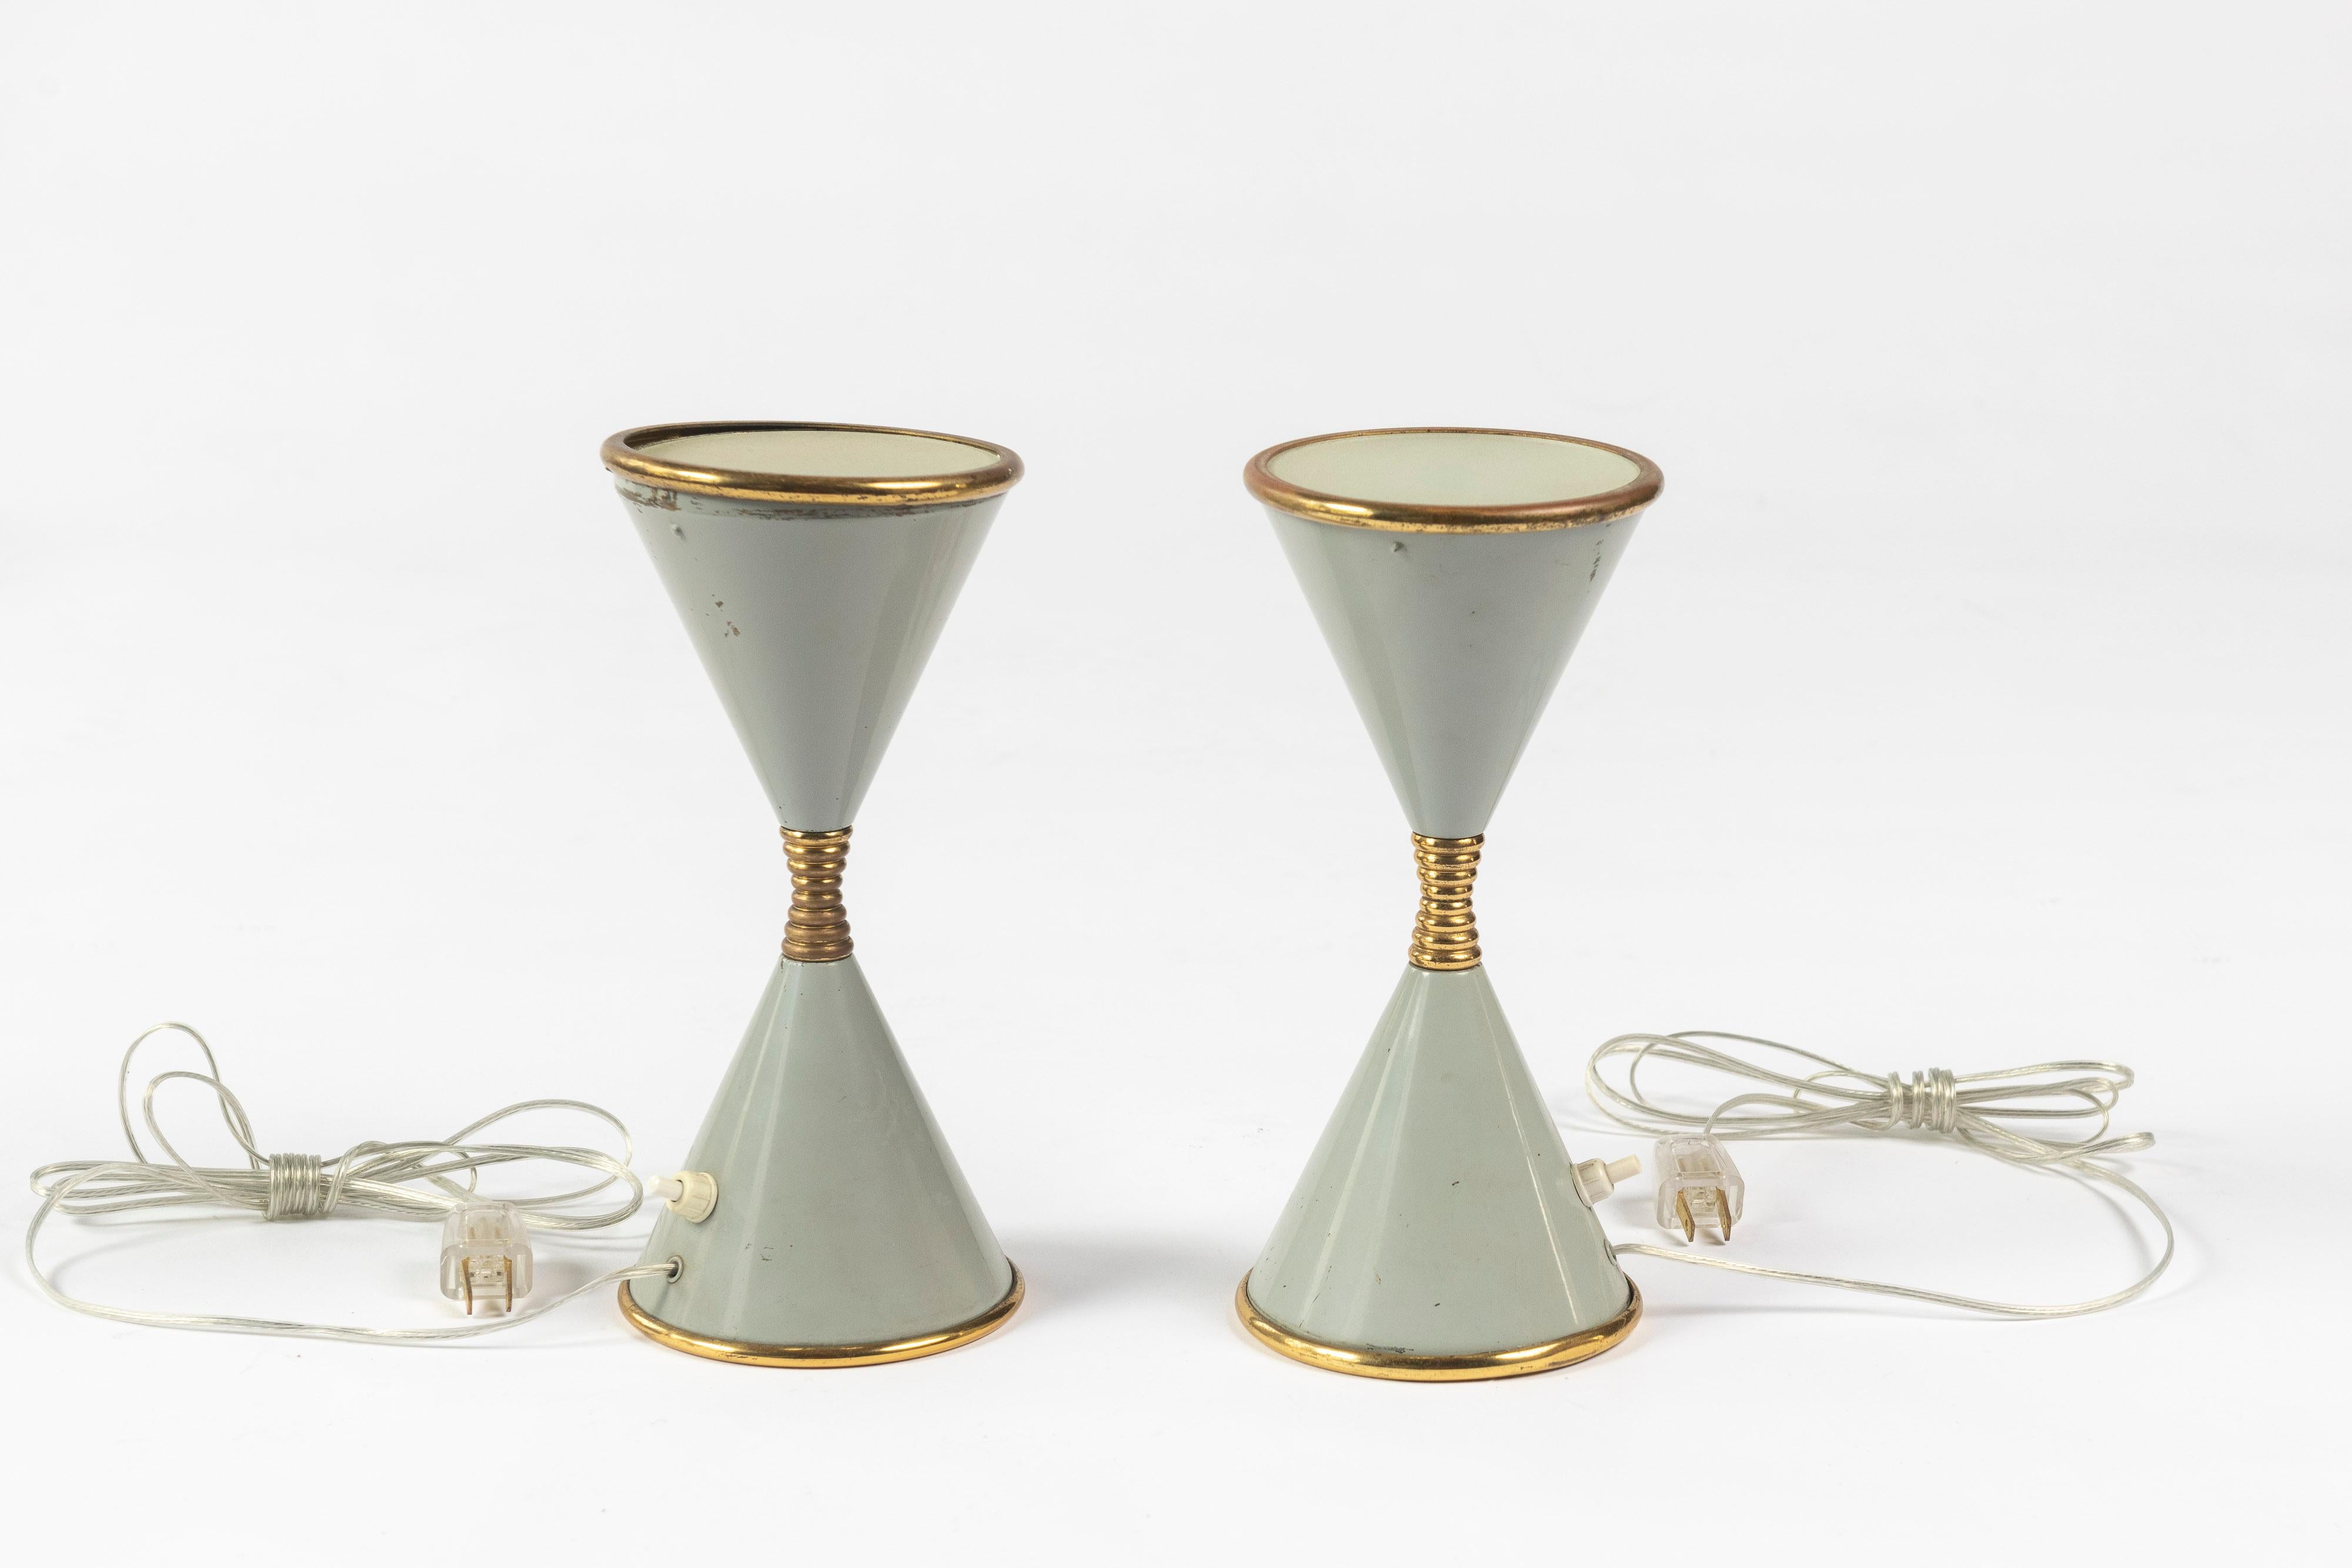 Pair of rare hourglass lamps, designed by Angelo Lelii for Arredoluce, made in the early 1960s. The lamps are sold as a pair and are lacquered brass in a mid-century mint-grey, with frosted glass on the top of the shade.

Some scratches are